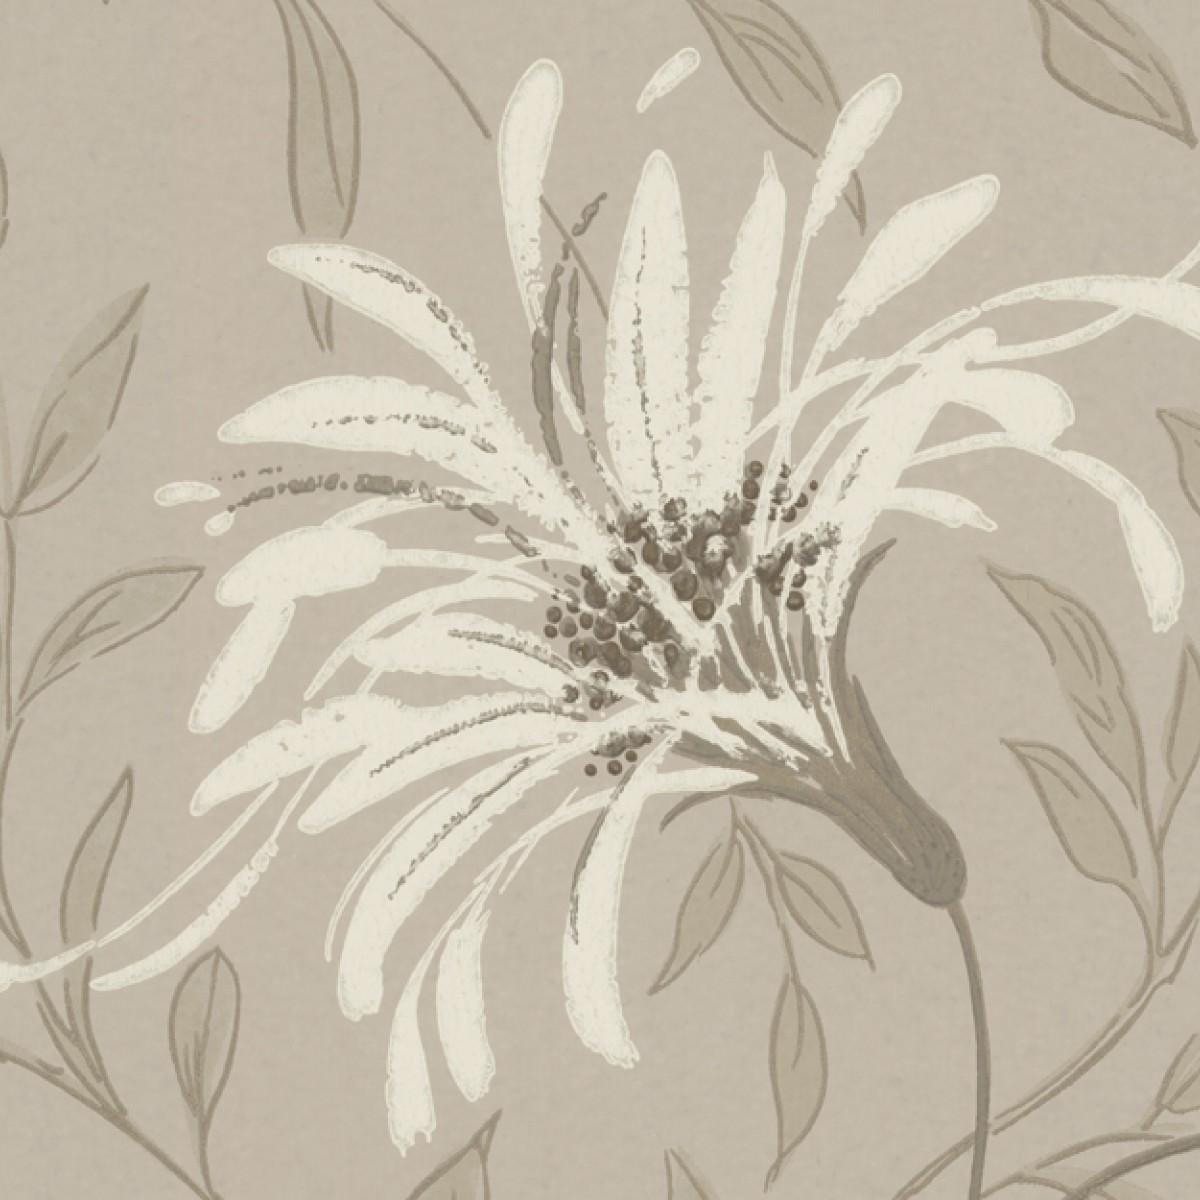 Tapet Fairhaven, Natural Luxury Floral, 1838 Wallcoverings, 5.3mp / rola, Tapet living 